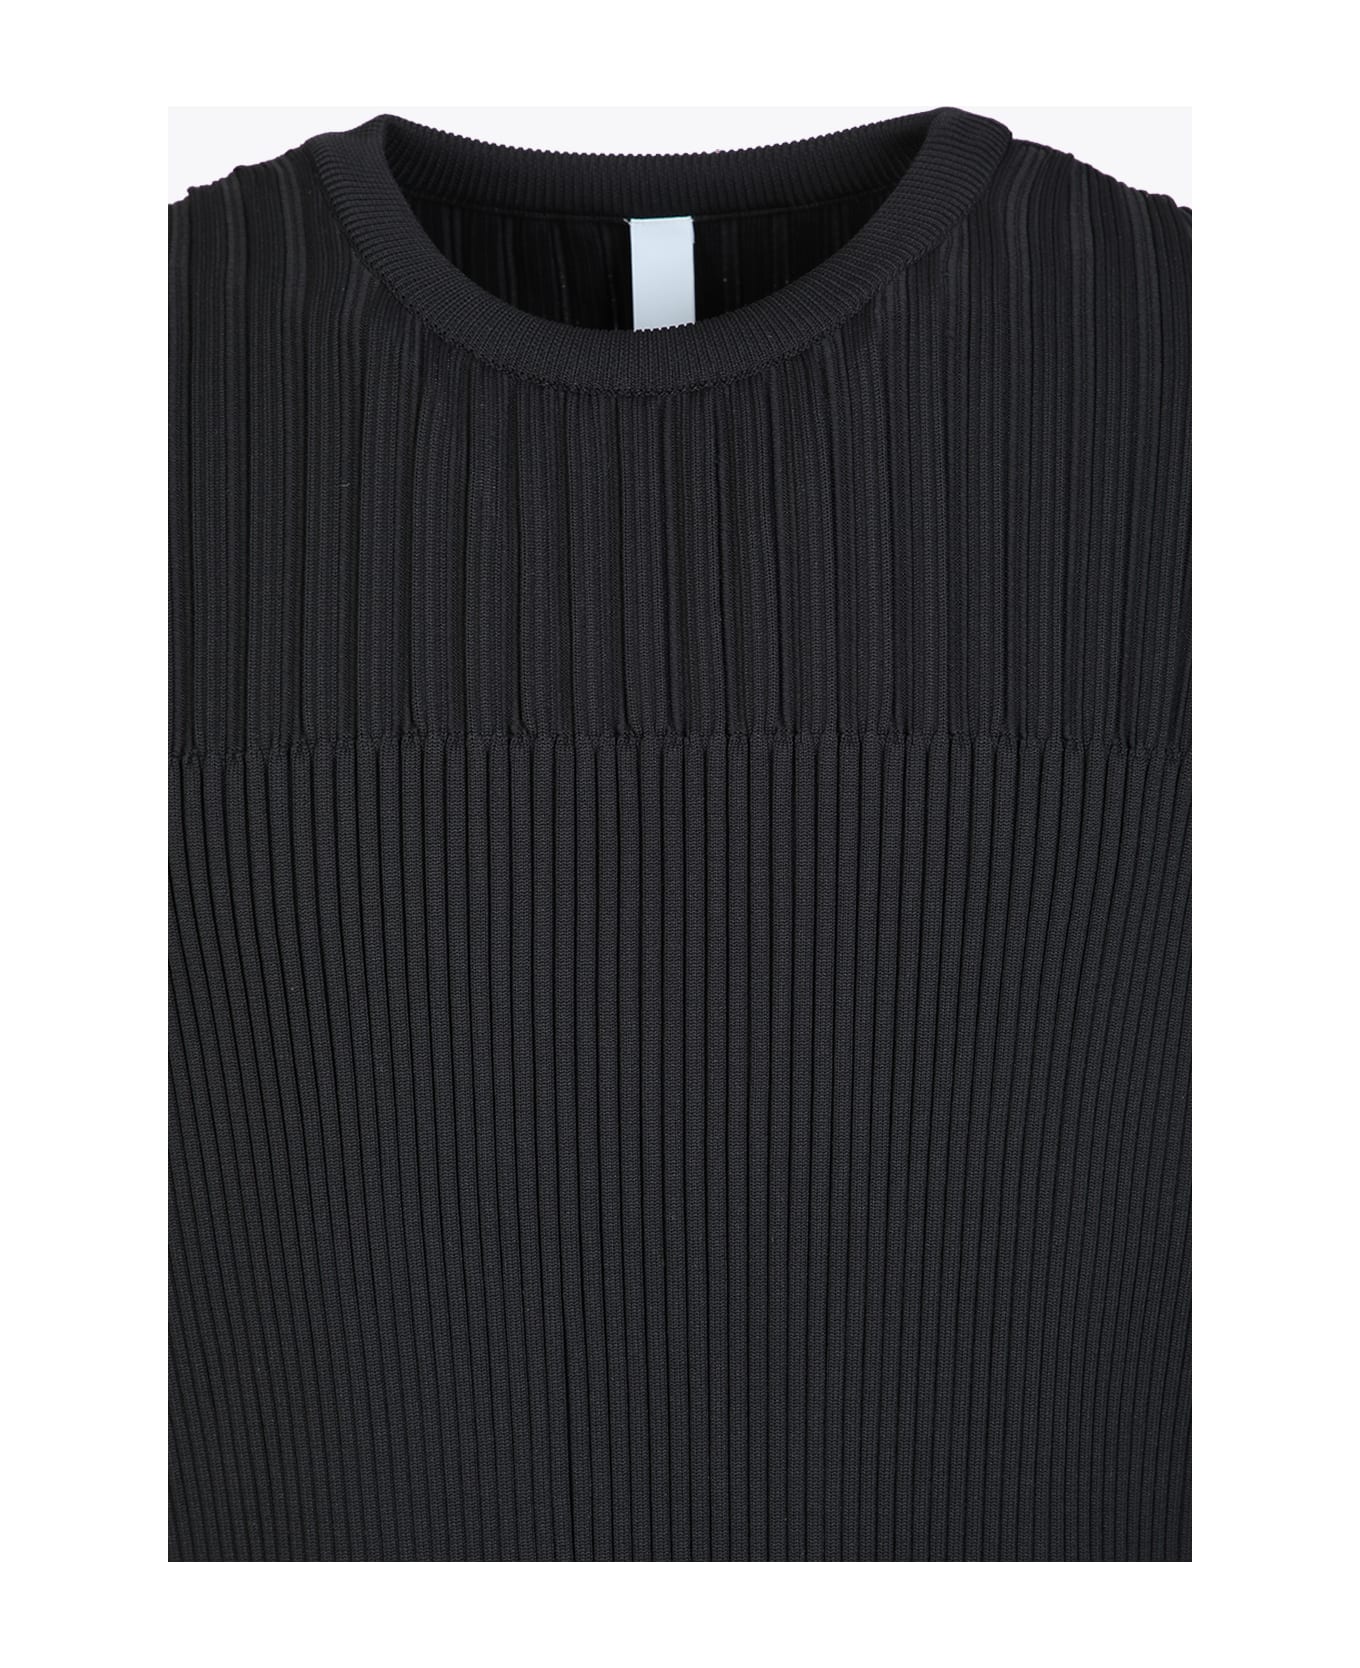 Fluted Top 3 Black rib-knitted curled top - Fluted top